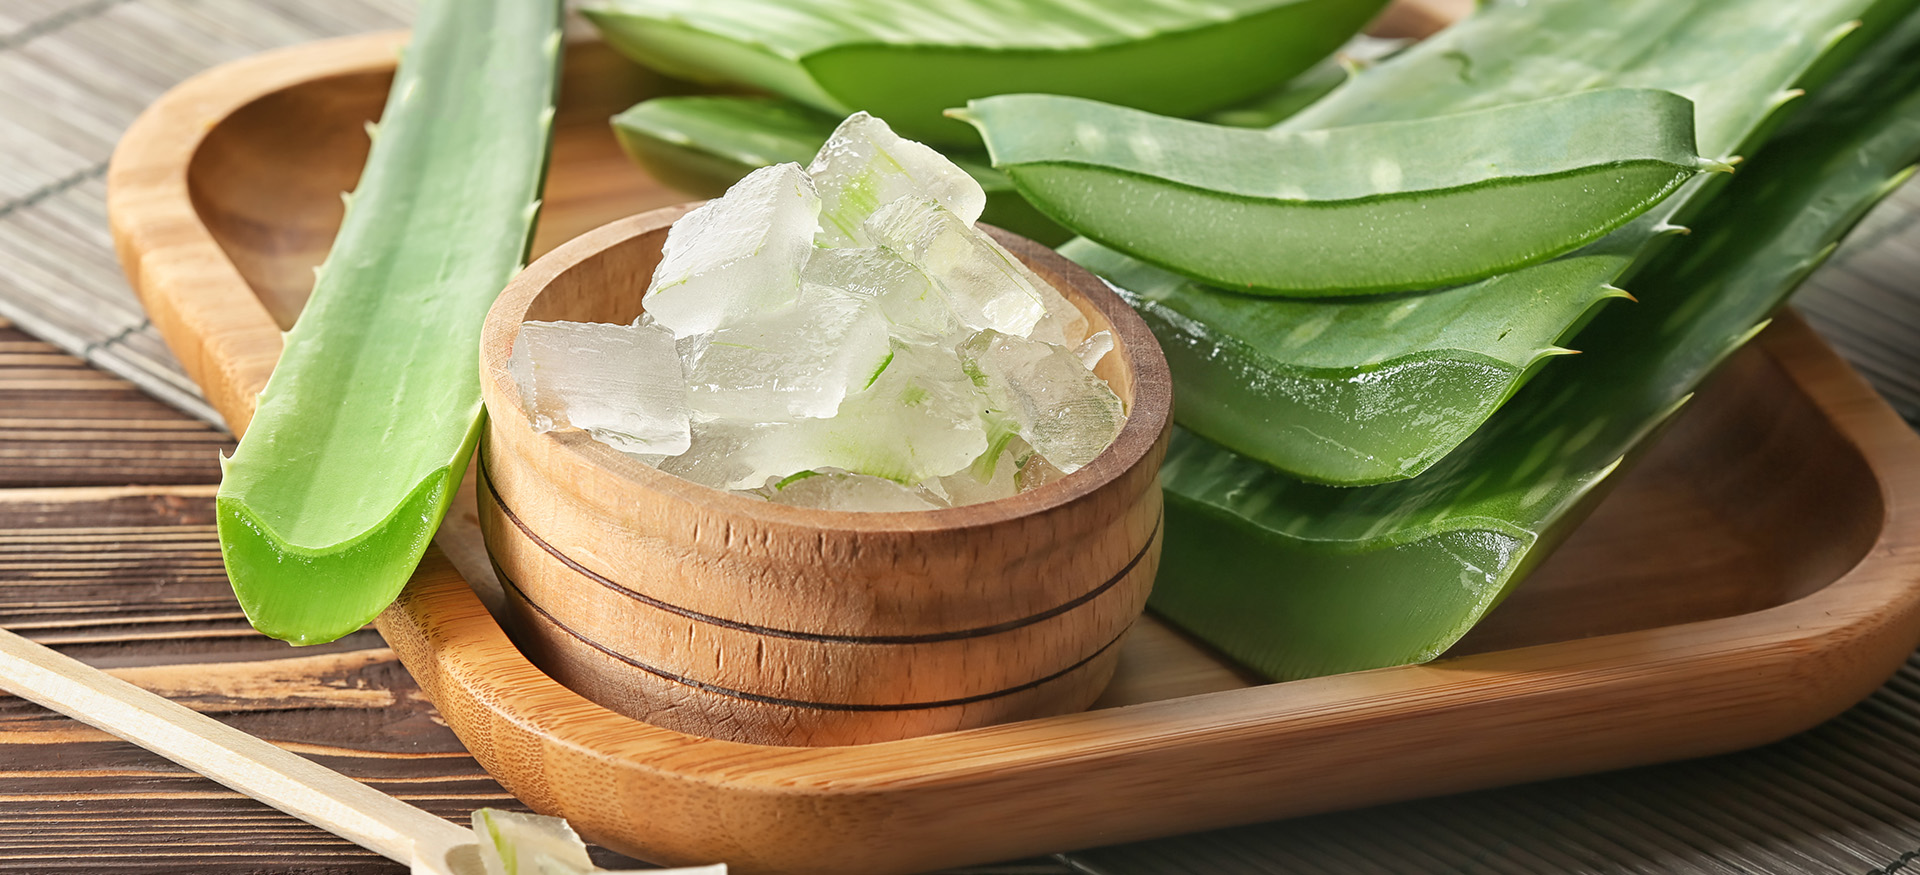 What Makes Aloe Vera Gel A Must-Have In Your Vanity?